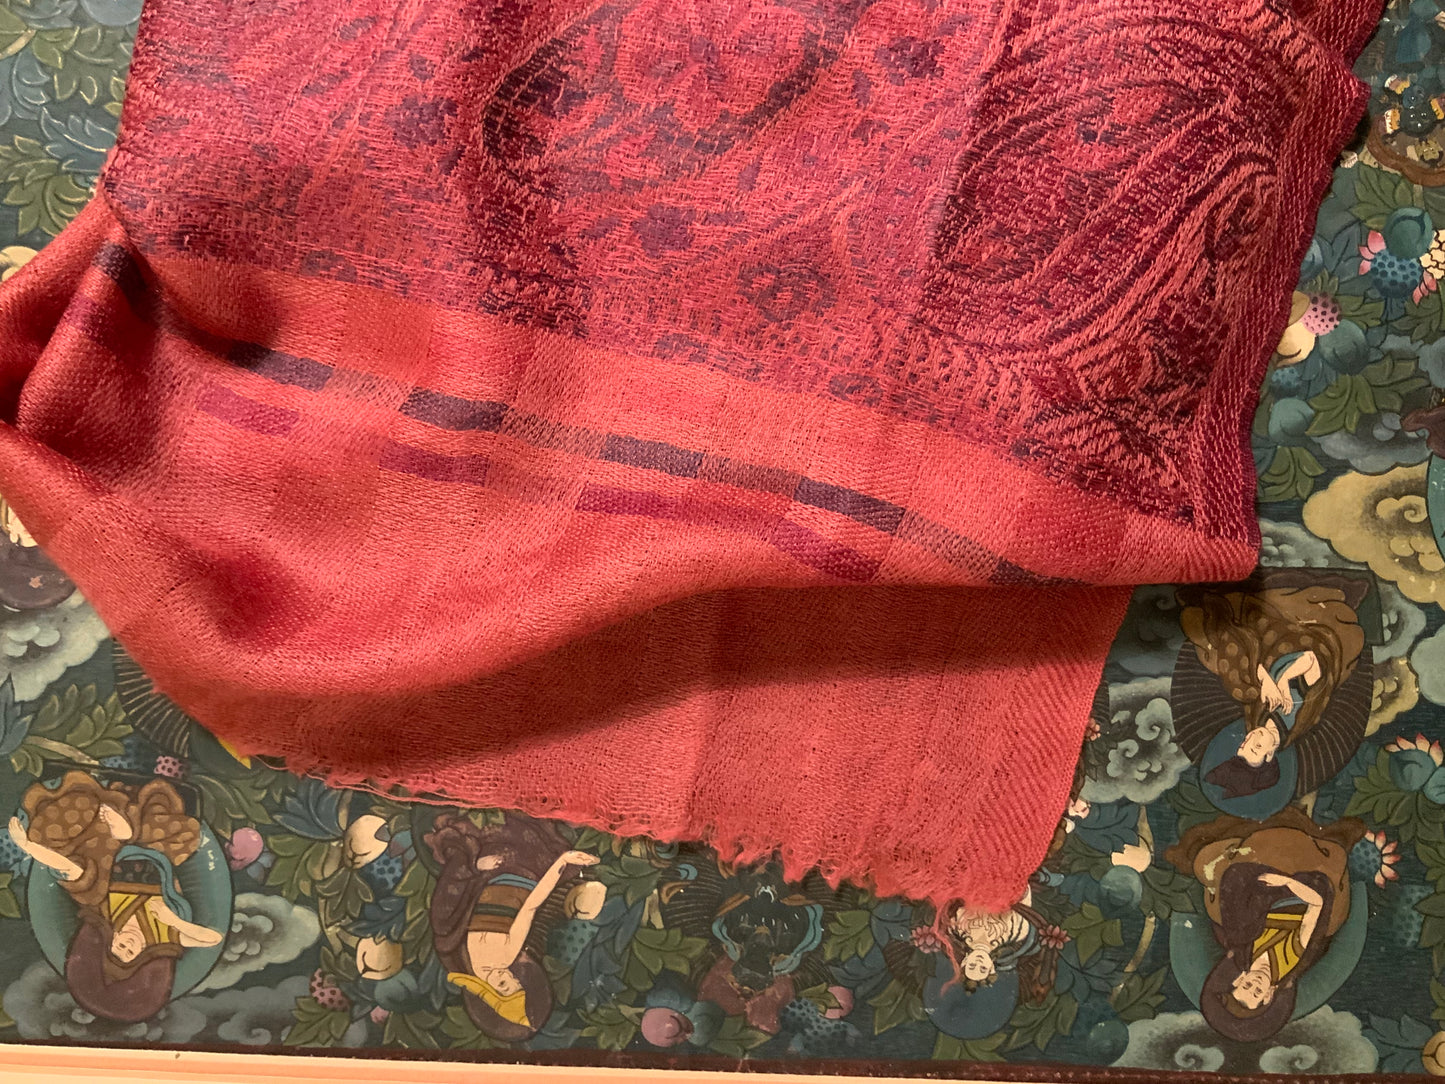 Kashmiri Shawl with Red with Paisley Border - DharBazaar